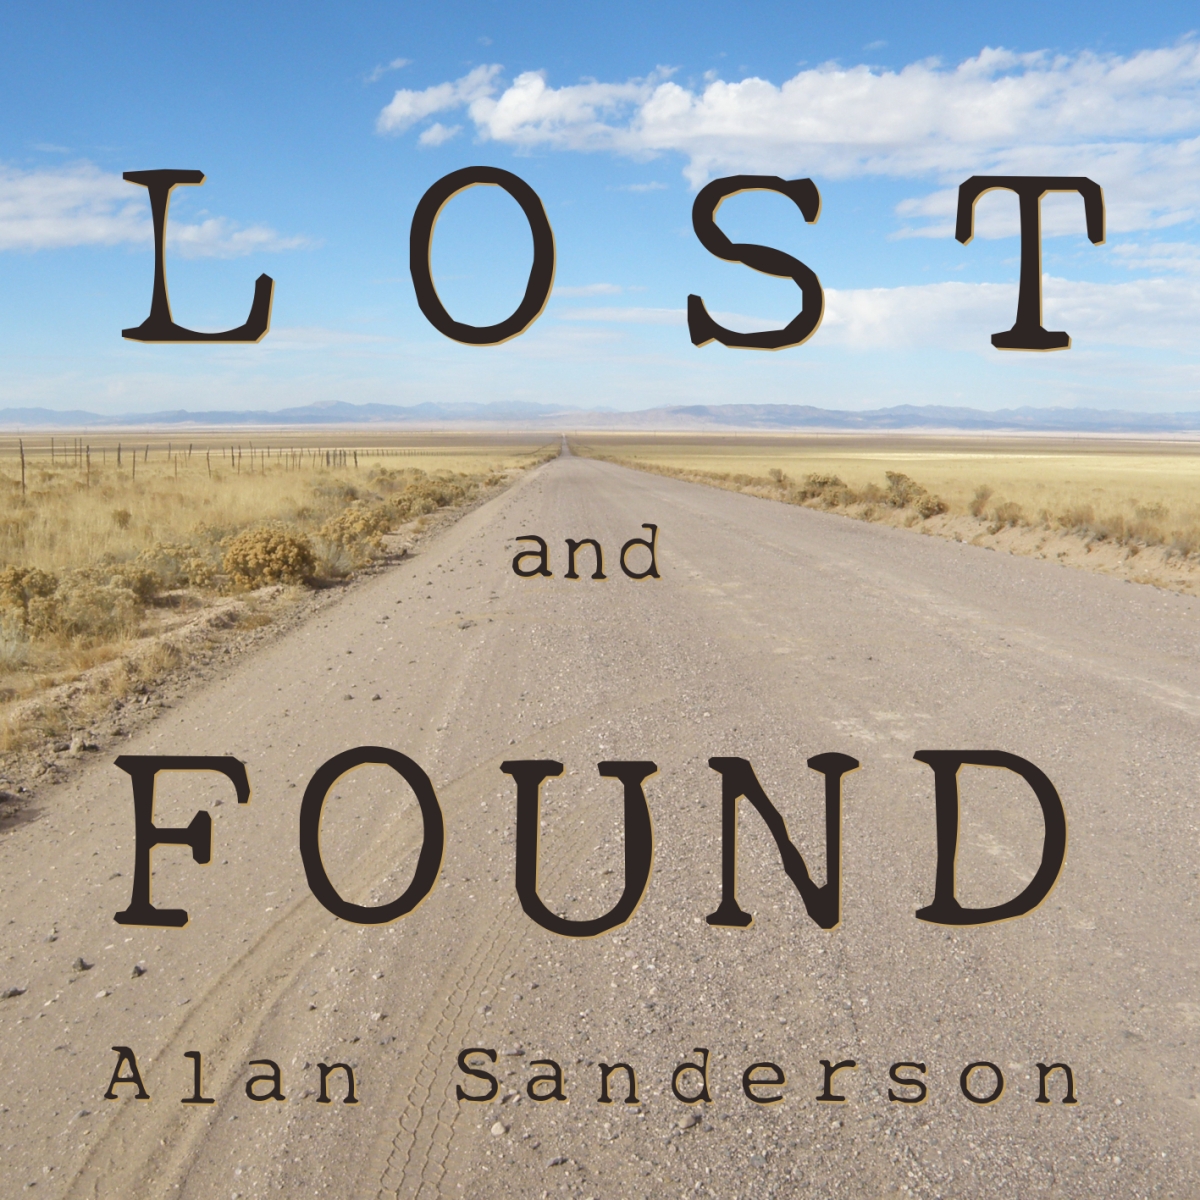 Alan Sanderson – Lost and Found